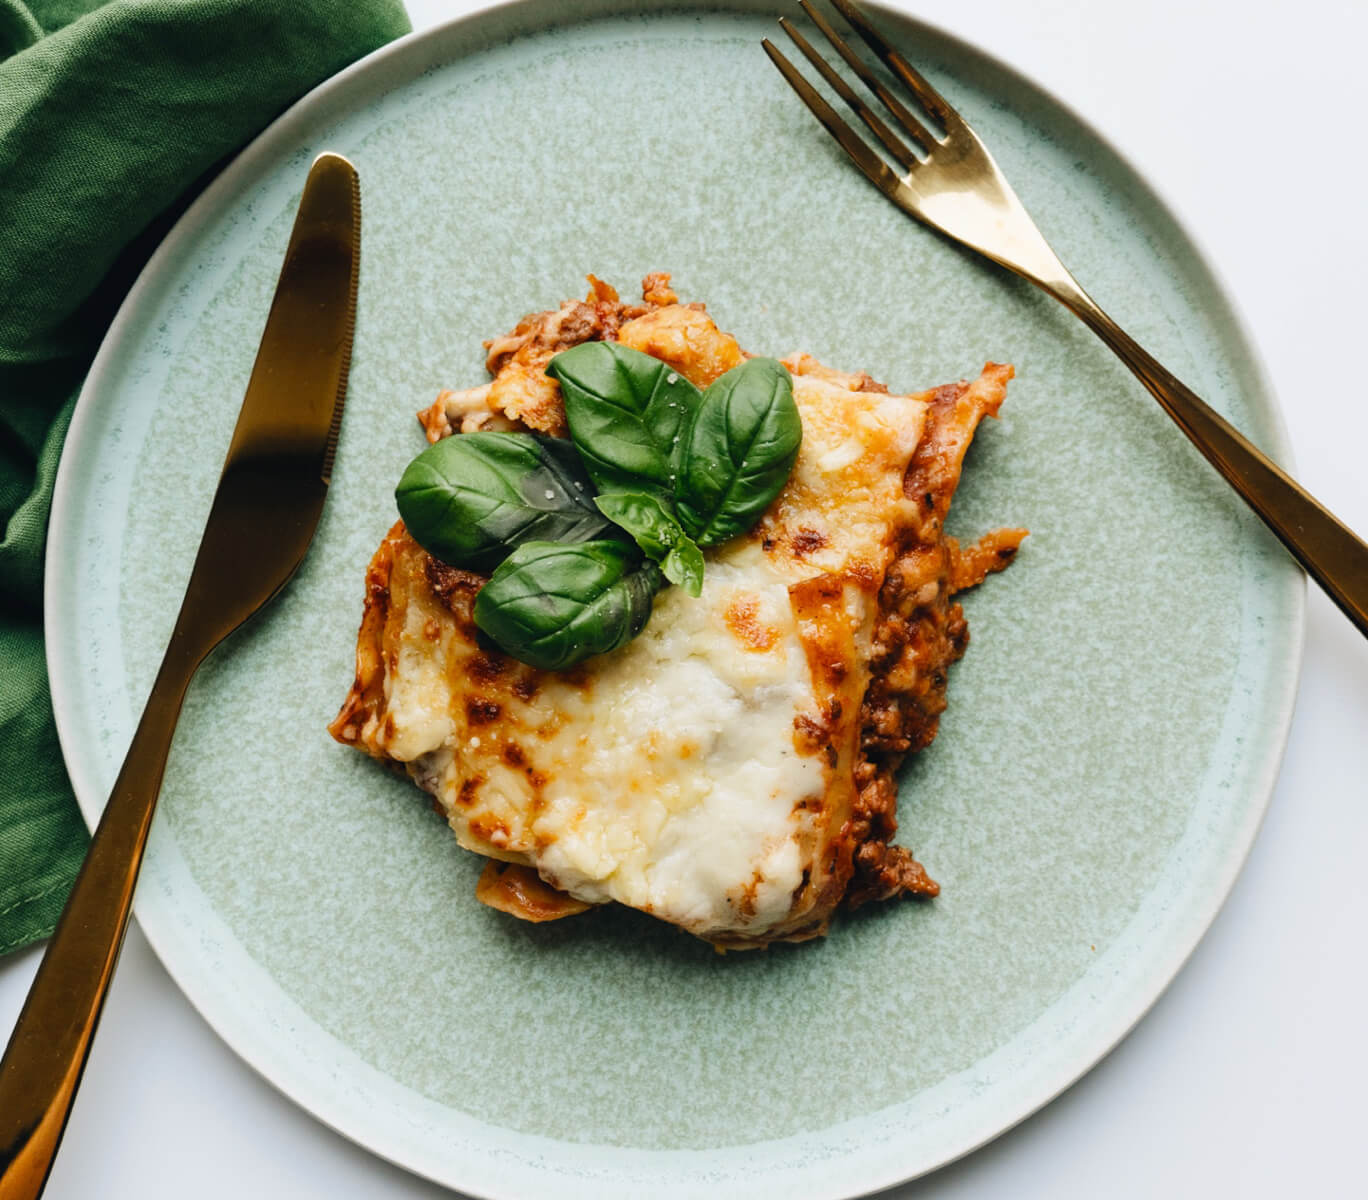 Ronzoni’s Easy Oven-Ready Lasagna on a plate with utensils and fresh basil.